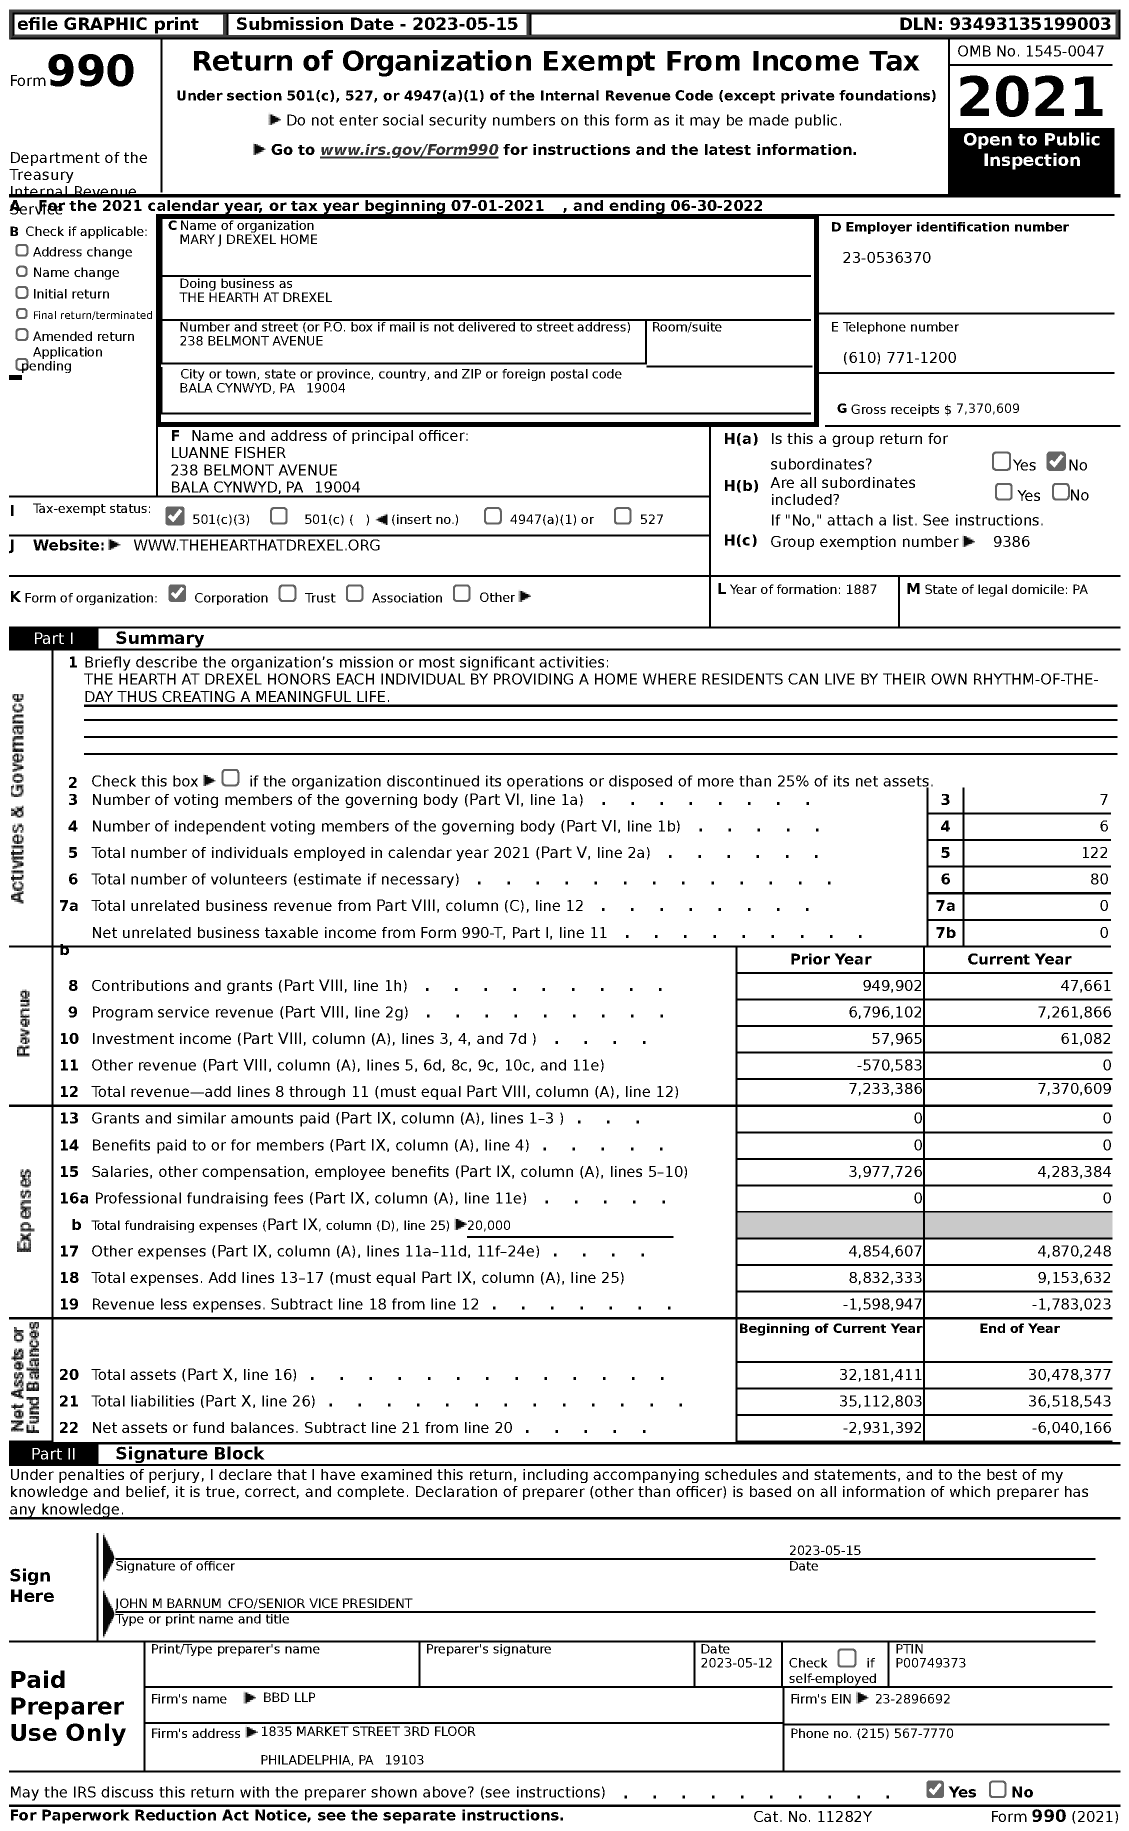 Image of first page of 2021 Form 990 for The Hearth at Drexel